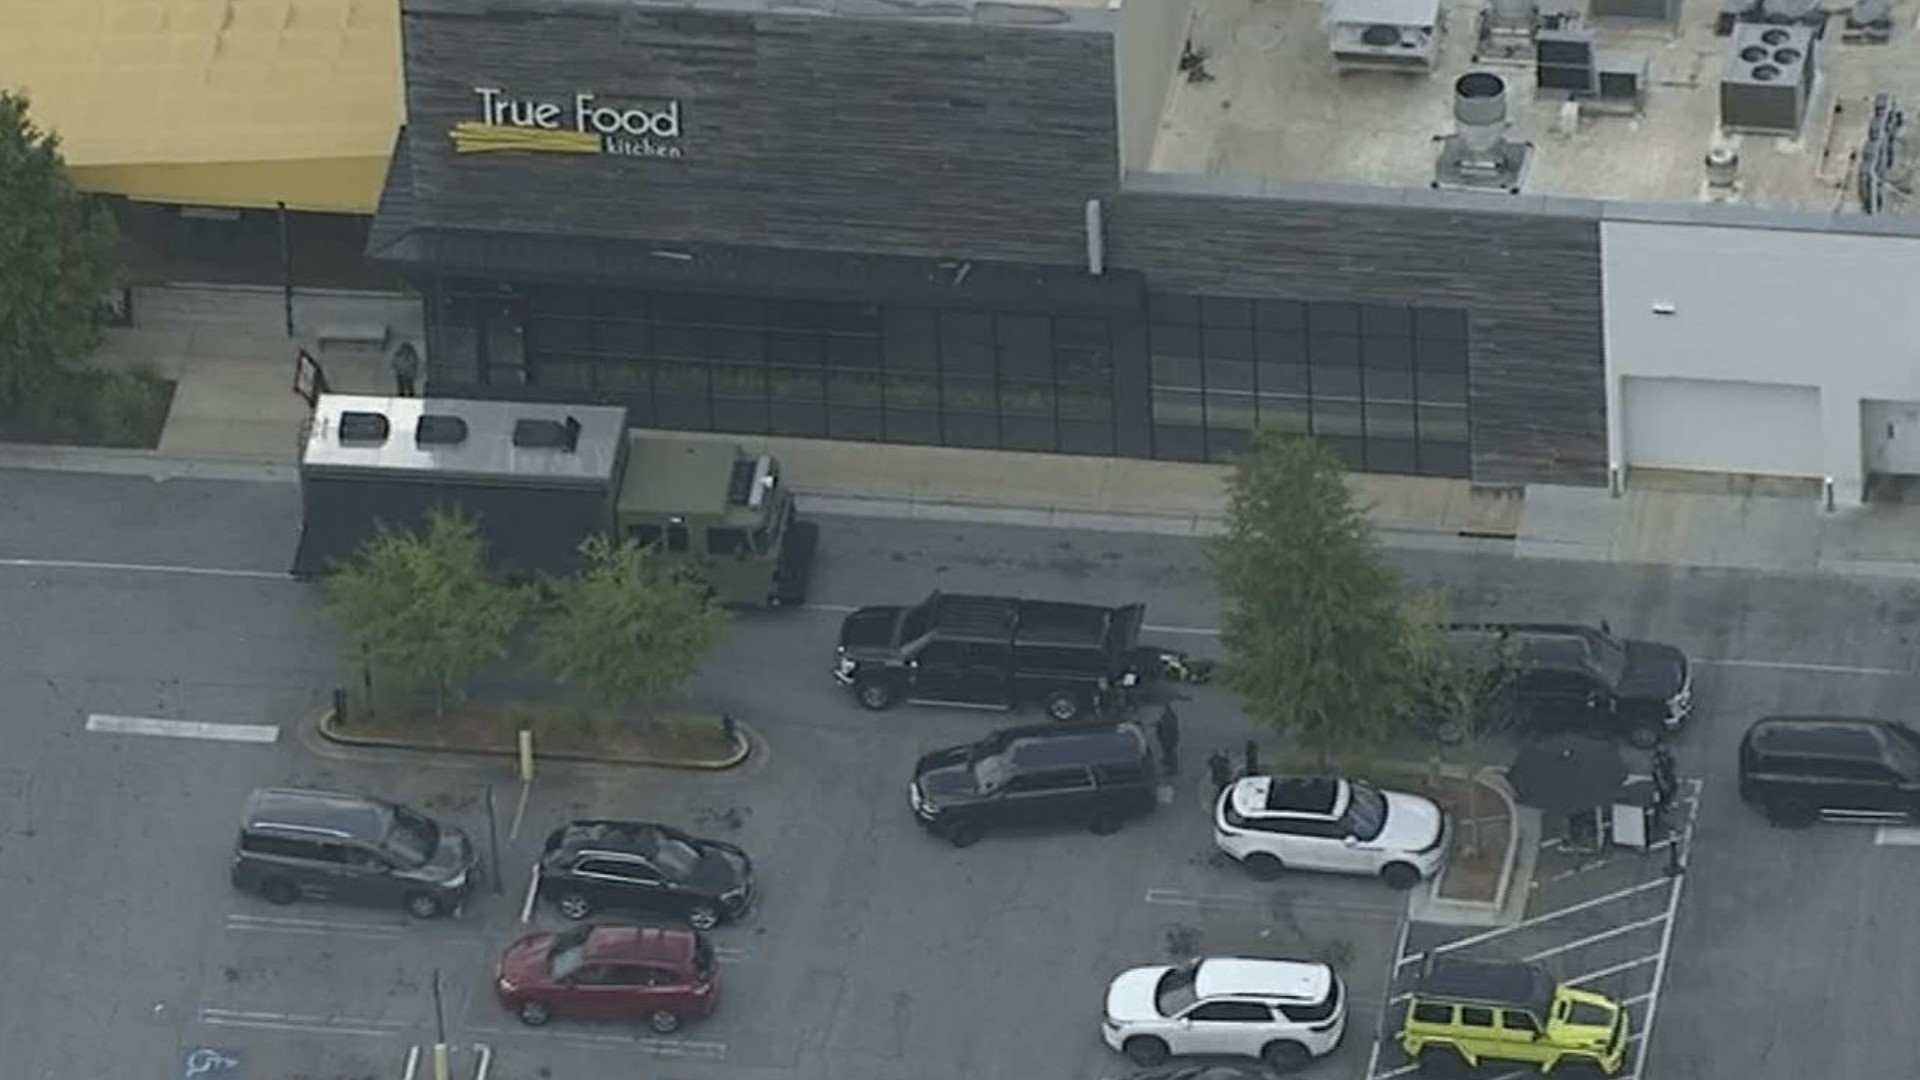 Authorities were called to the mall parking lot in Buckhead Tuesday afternoon to investigate a suitcase that was left unattended, Atlanta Police said.